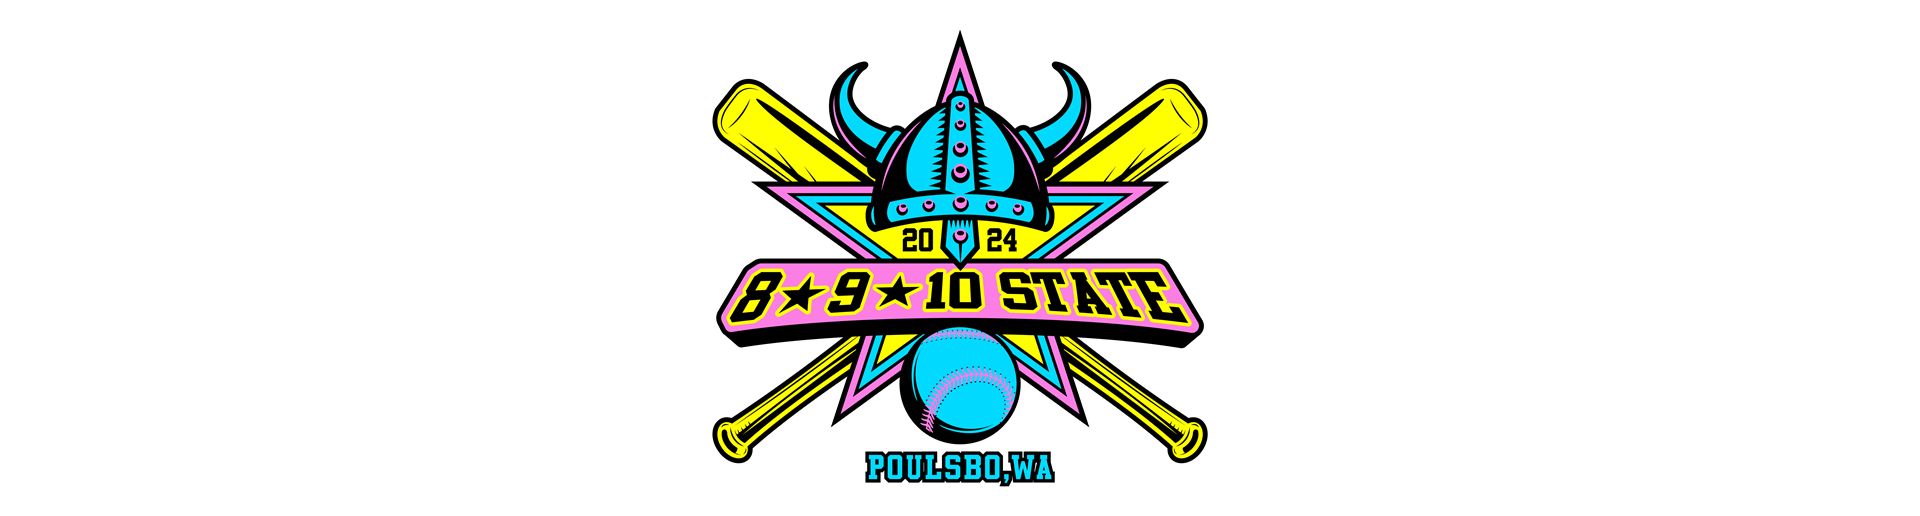 8-10 State Tourney July 20th-27th 